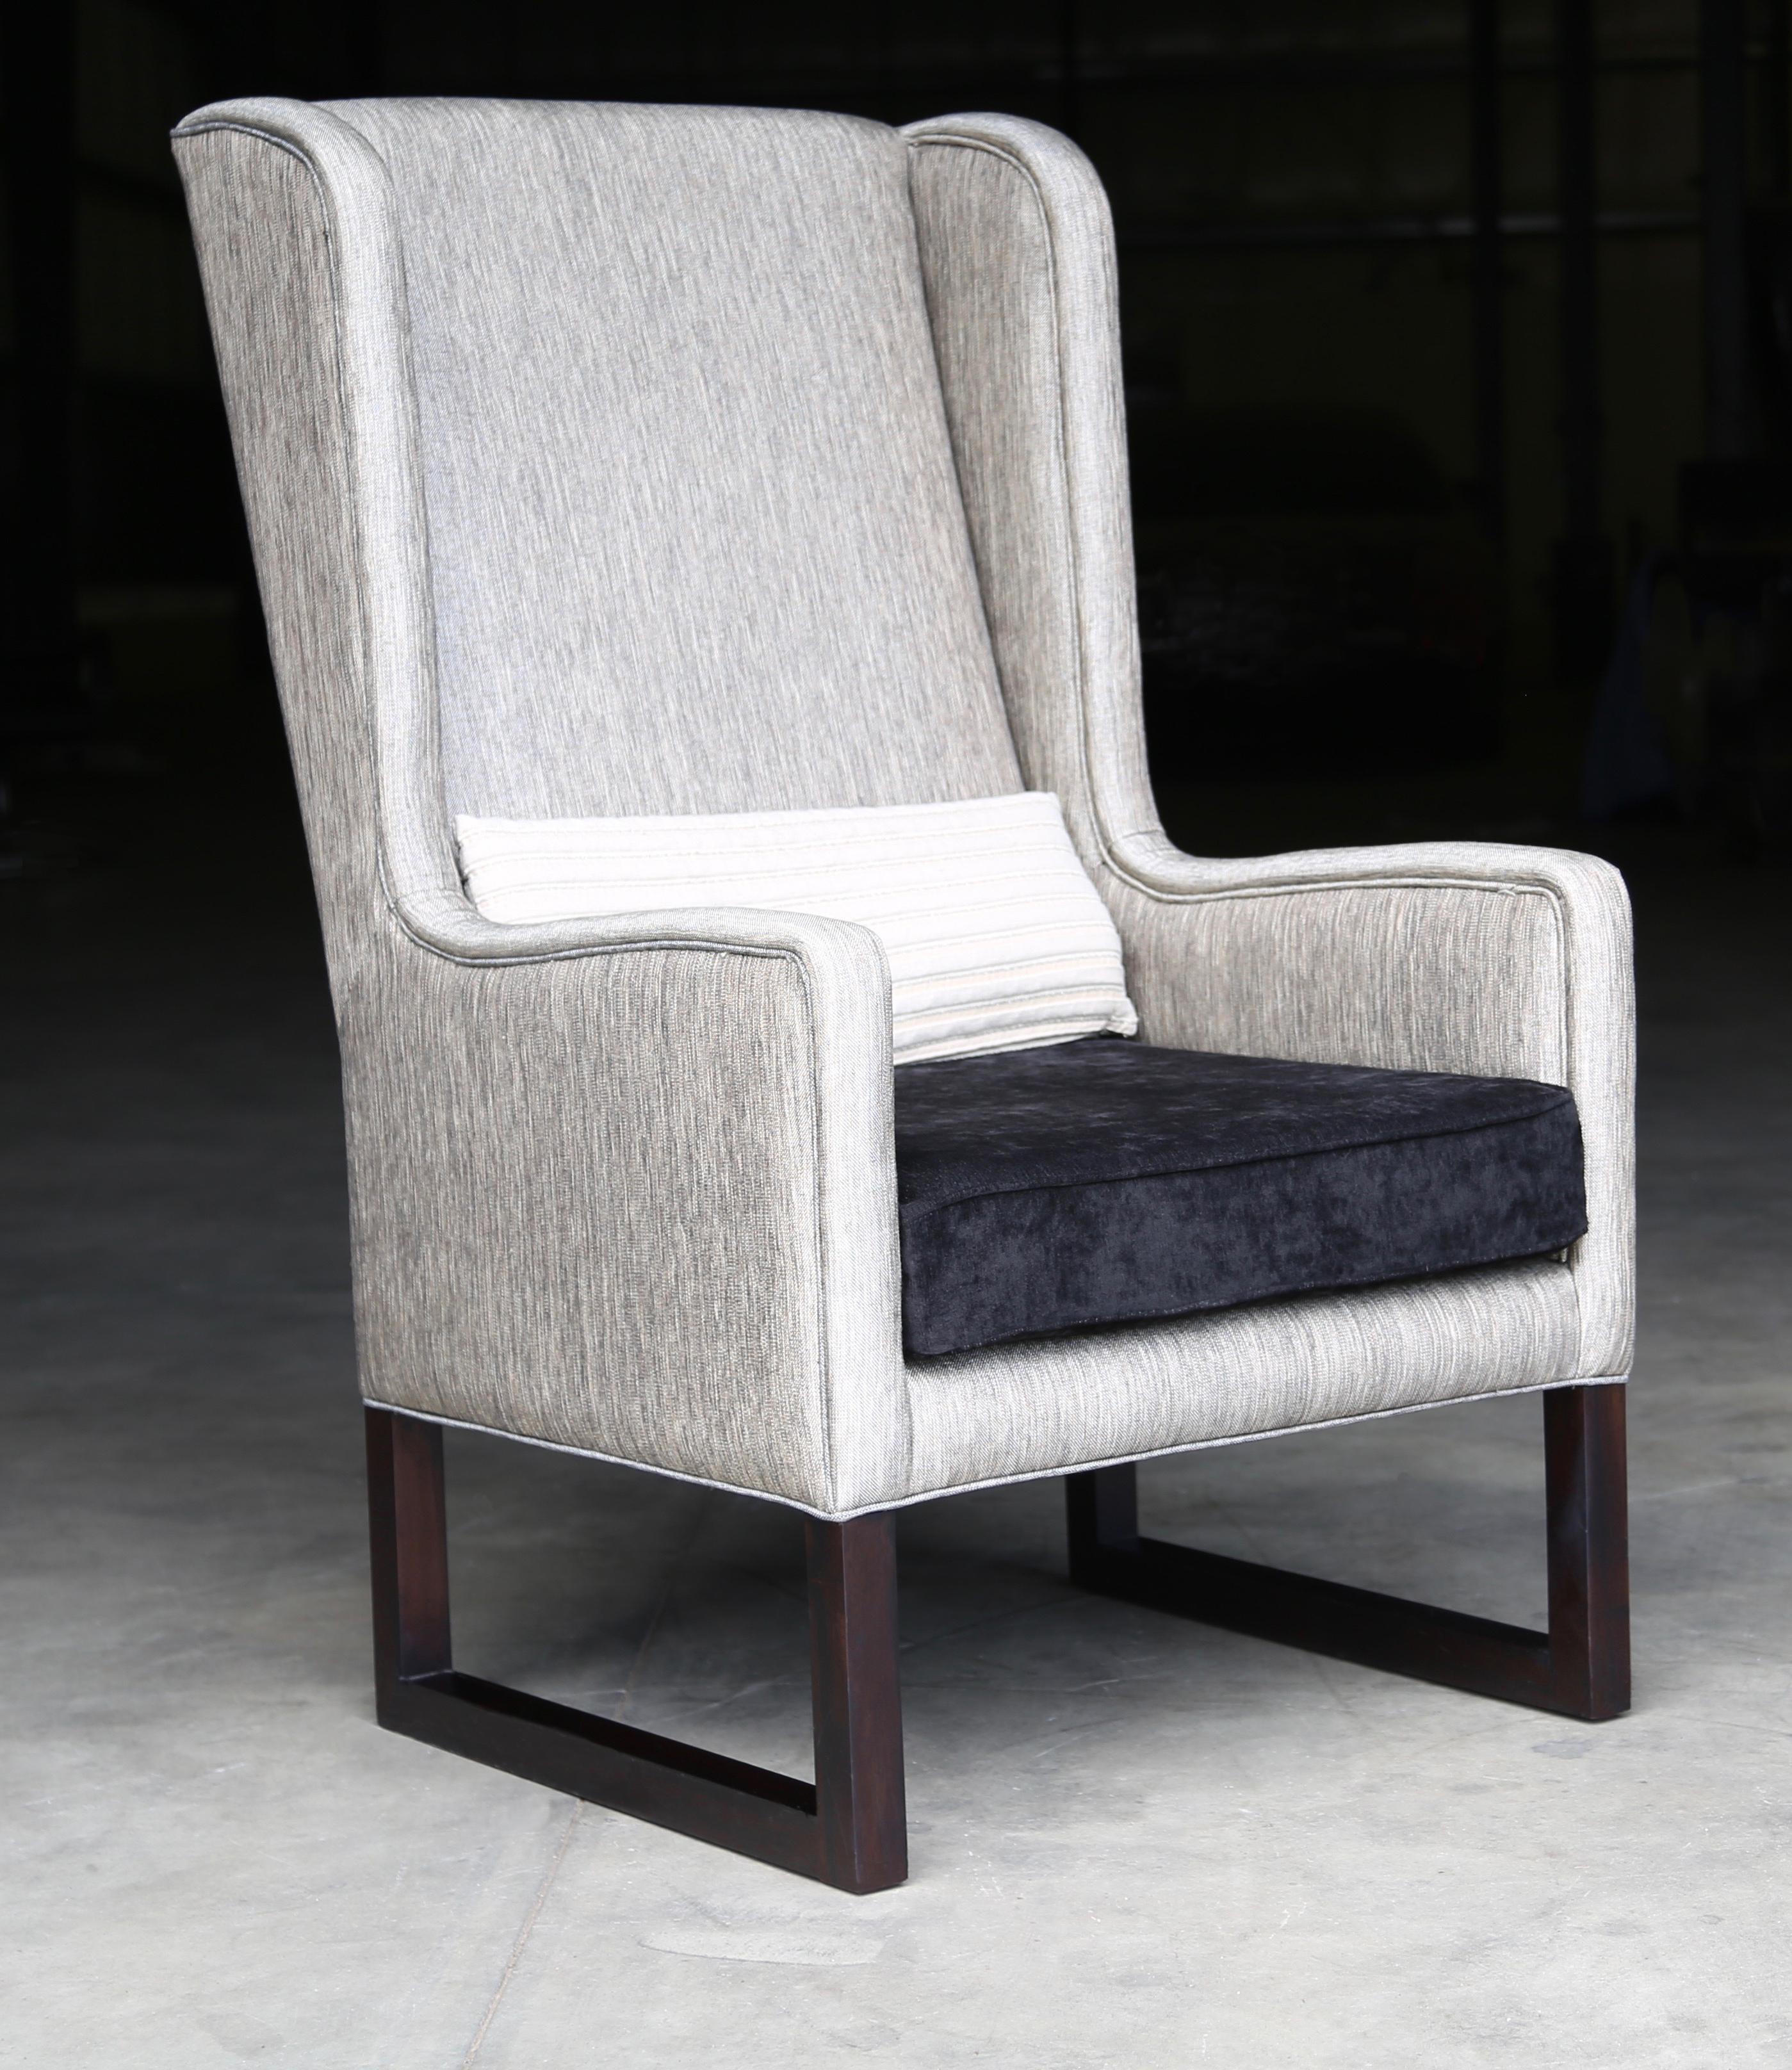 Matteo Modern High Back Upholstered Wing Chair from Costantini

Measurements are 23